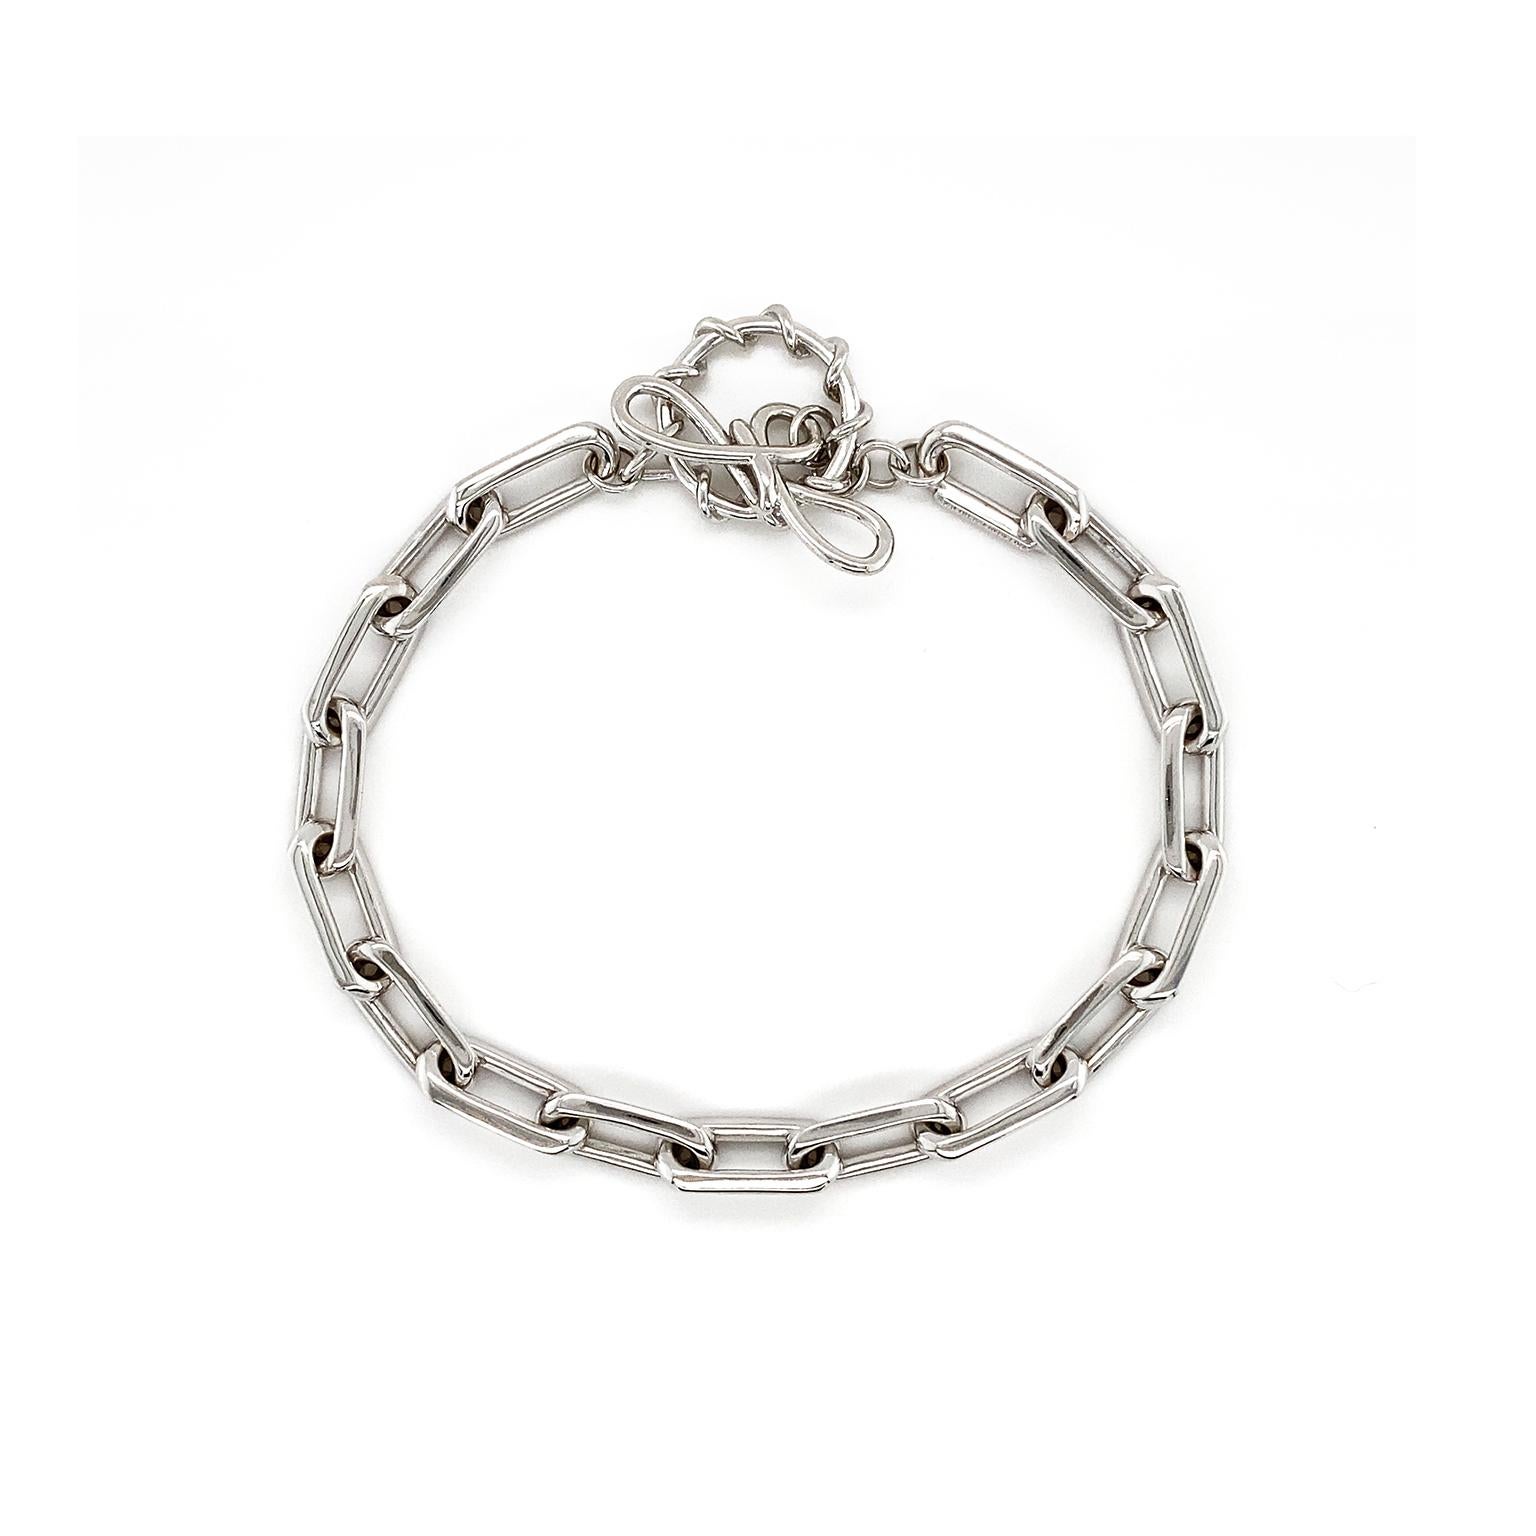 Polished 18k white gold elongated interlaced links create a timeless brilliance for this bracelet. The bracelet measures 8.58 inches (length).